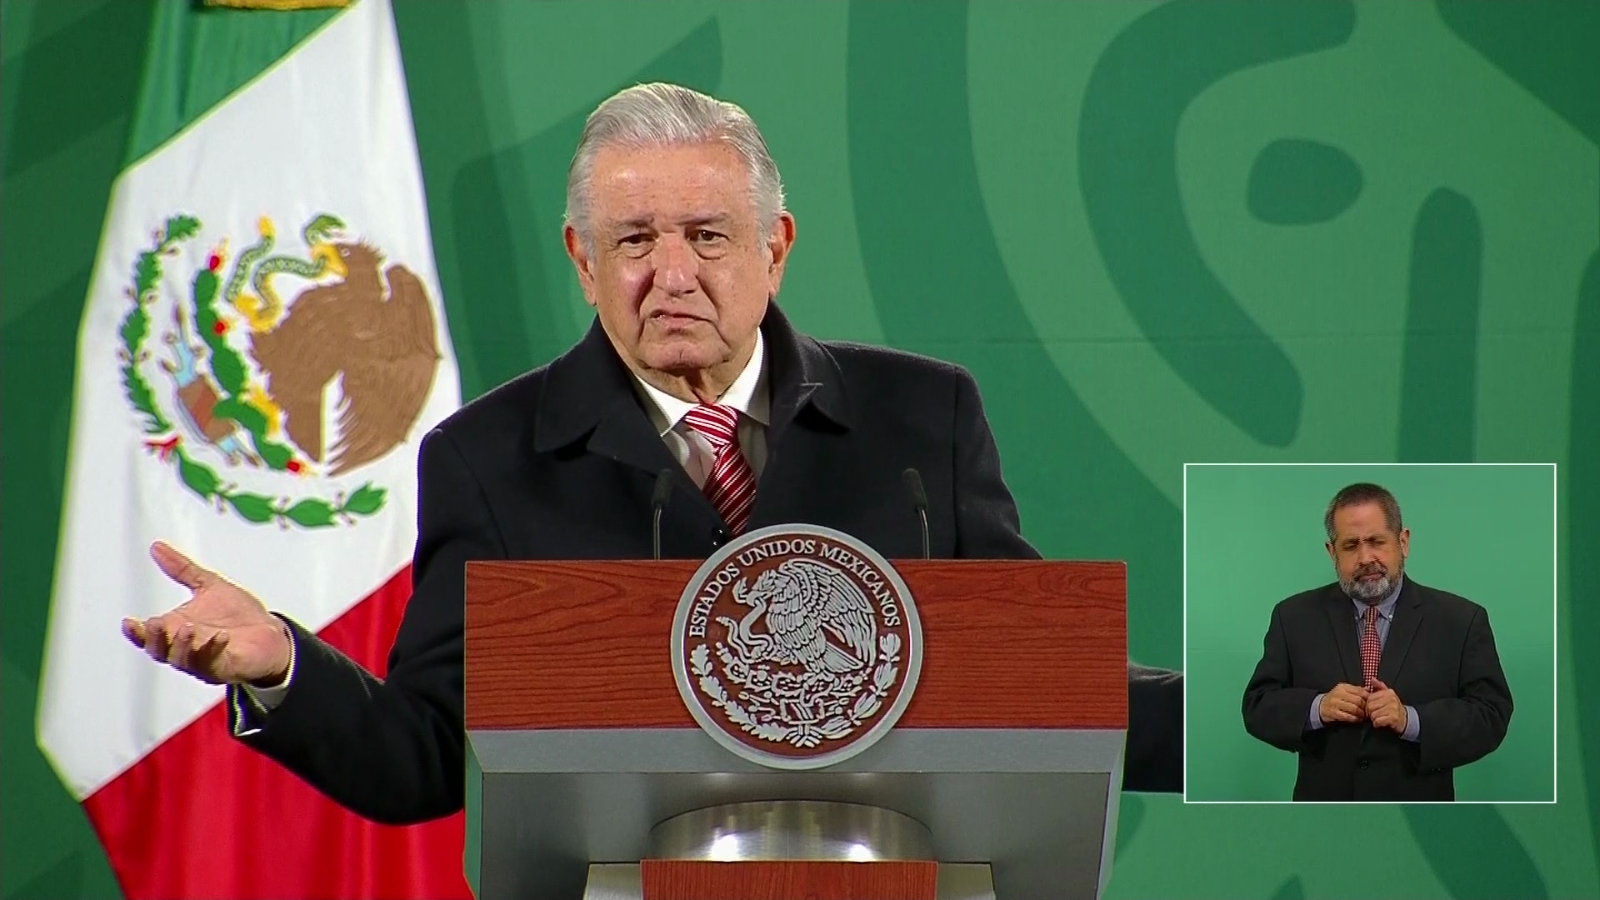 Amlo: "The embargo against Cuba is inhumane and suffocating"